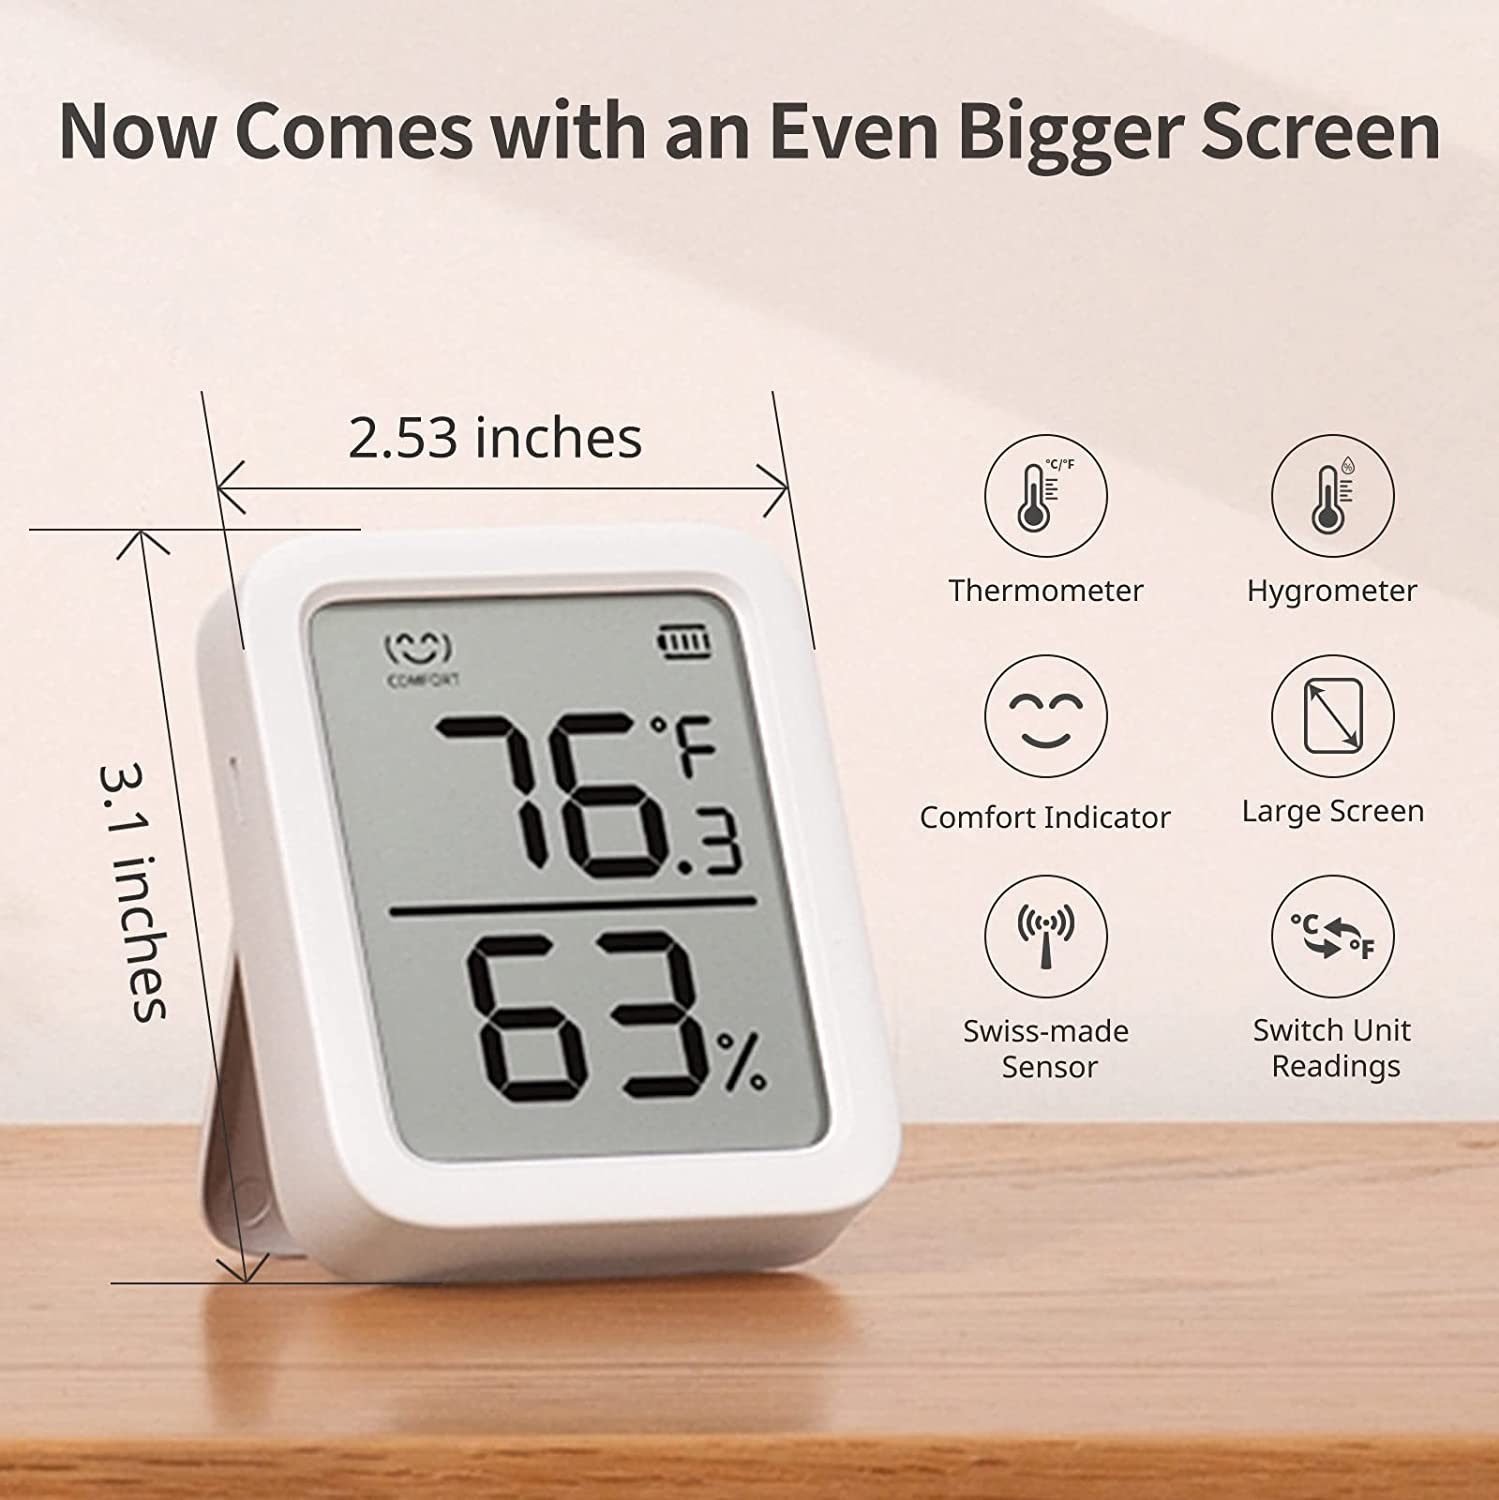 SwitchBot Thermometer & Hygrometer Plus | Bluetooth Indoor Humidity Meter and Temperature Sensor with App Control, Notification Alerts, Remote Monitor for Home